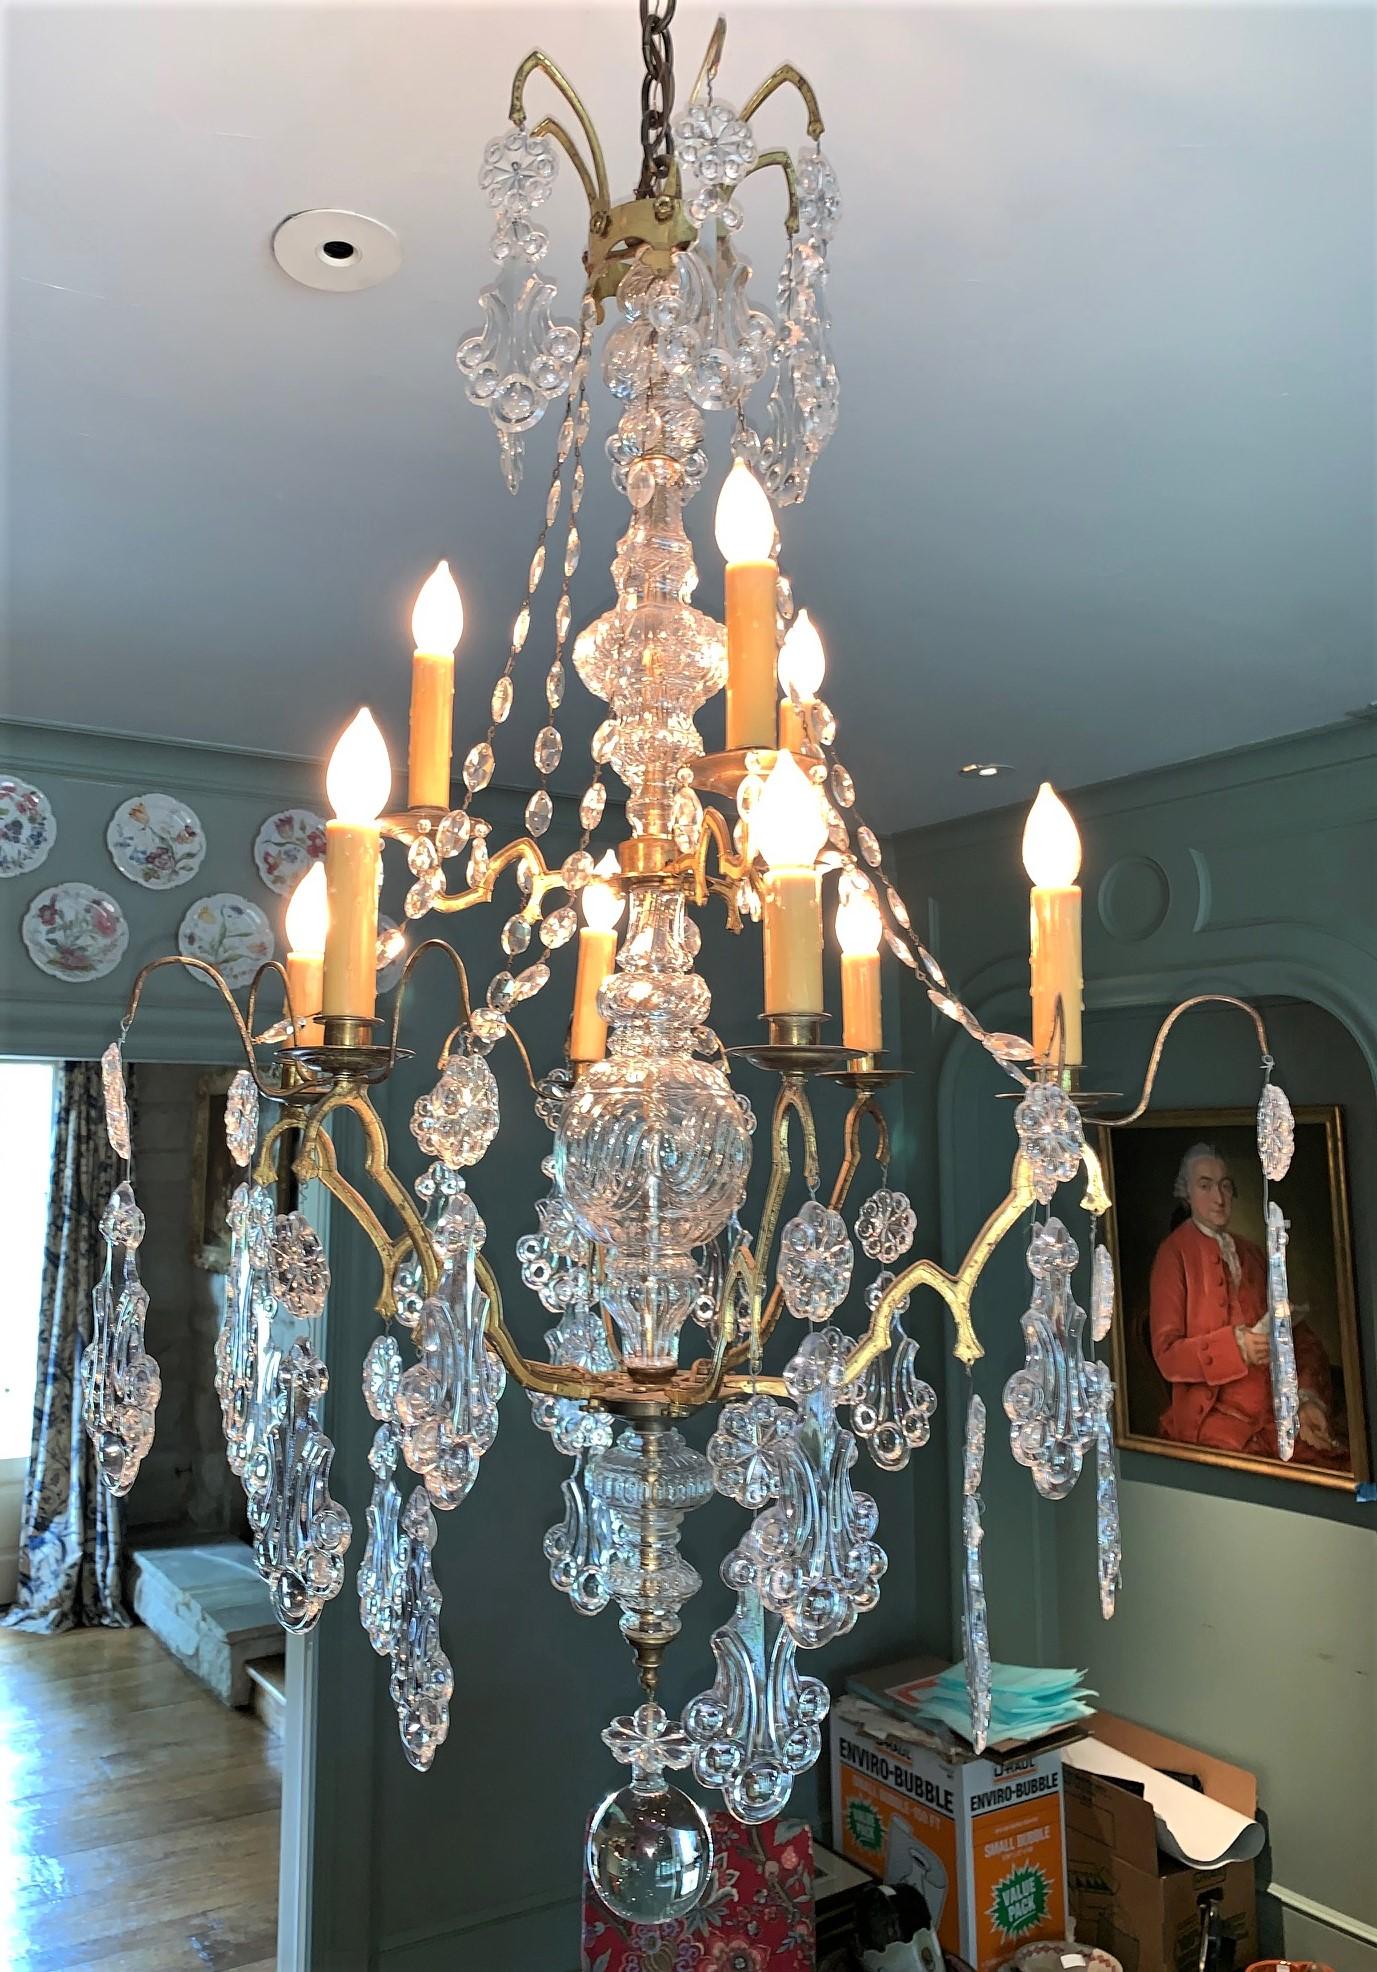 Exquisite 19th century French brass and bead crystal birdcage chandelier with Victorian hand blown glass stem, and unique blown glass prisms in a fancy Pendeloque design. The base accented with a polished crystal sphere,

circa 1860.